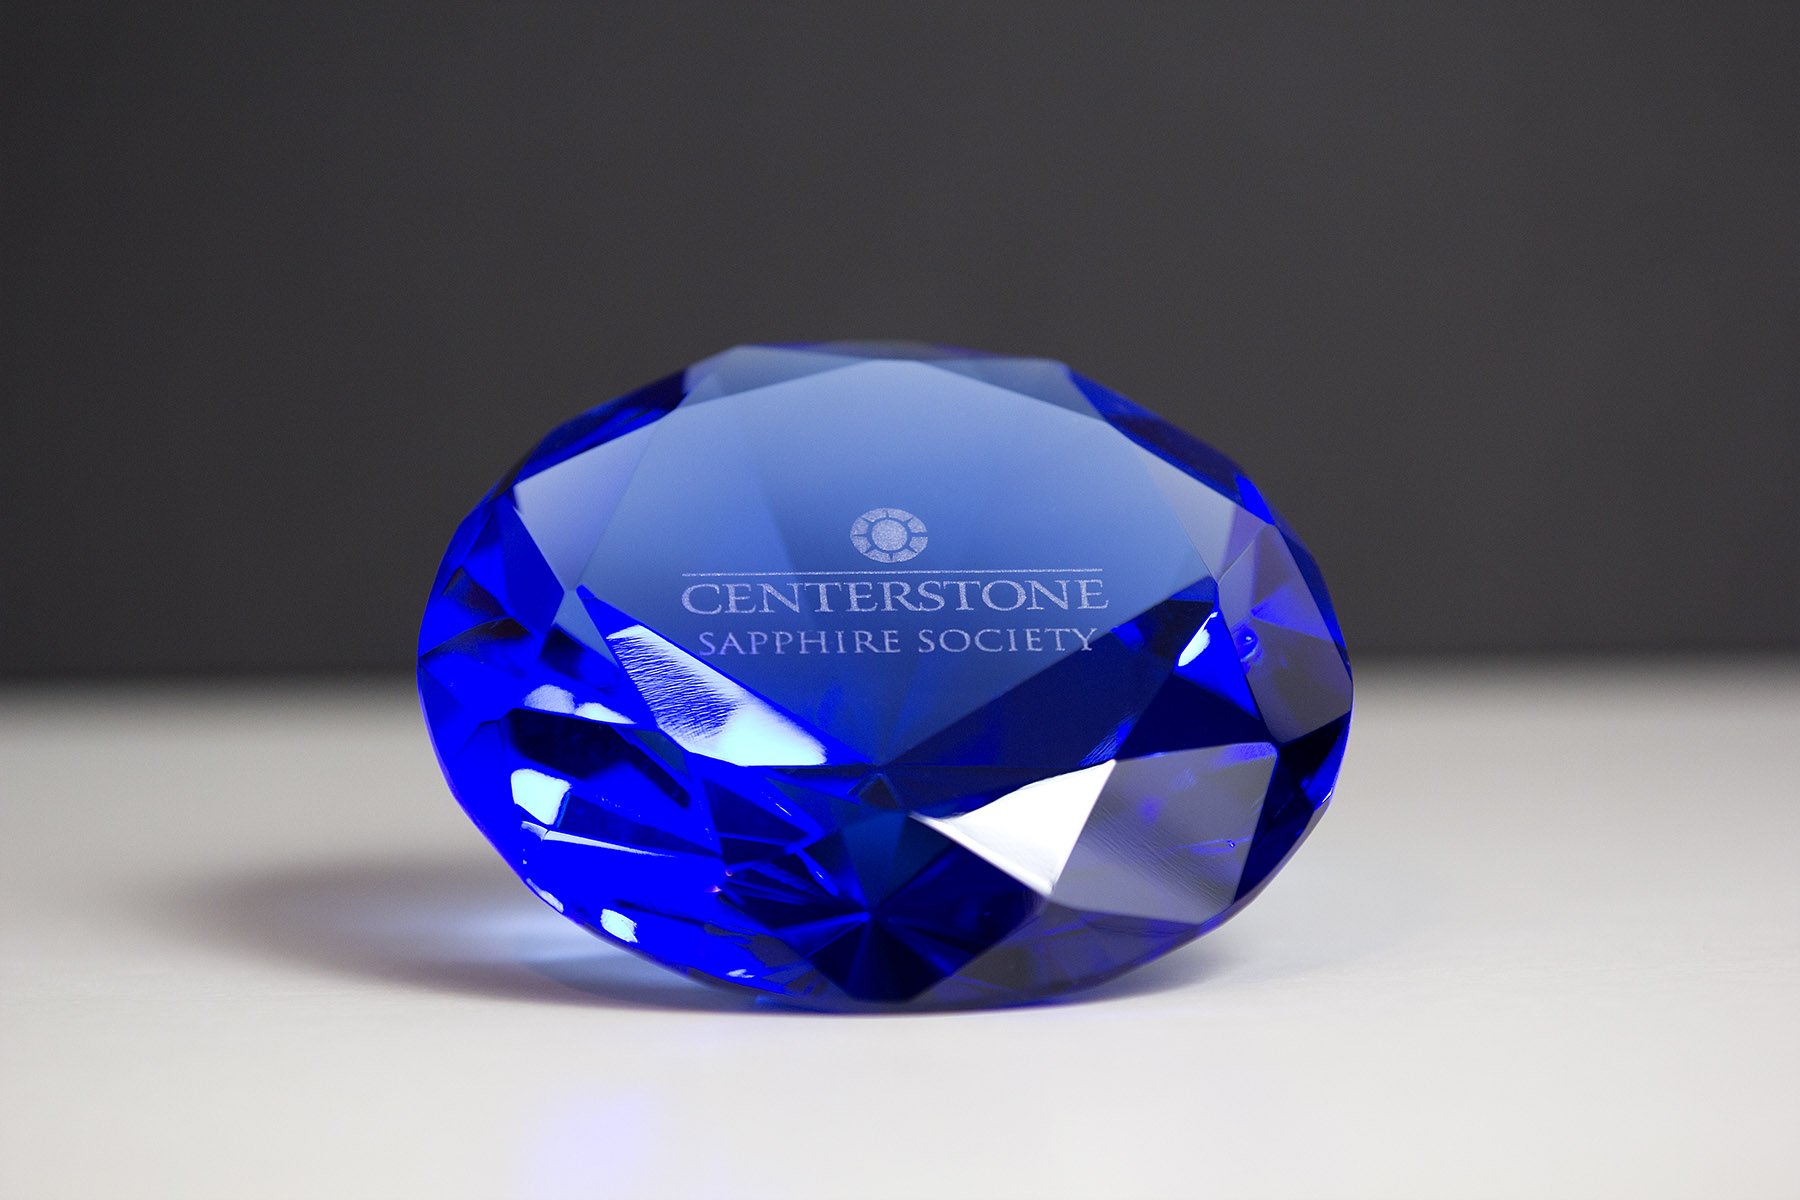 sapphire with Centerstone Sapphire Society image in center